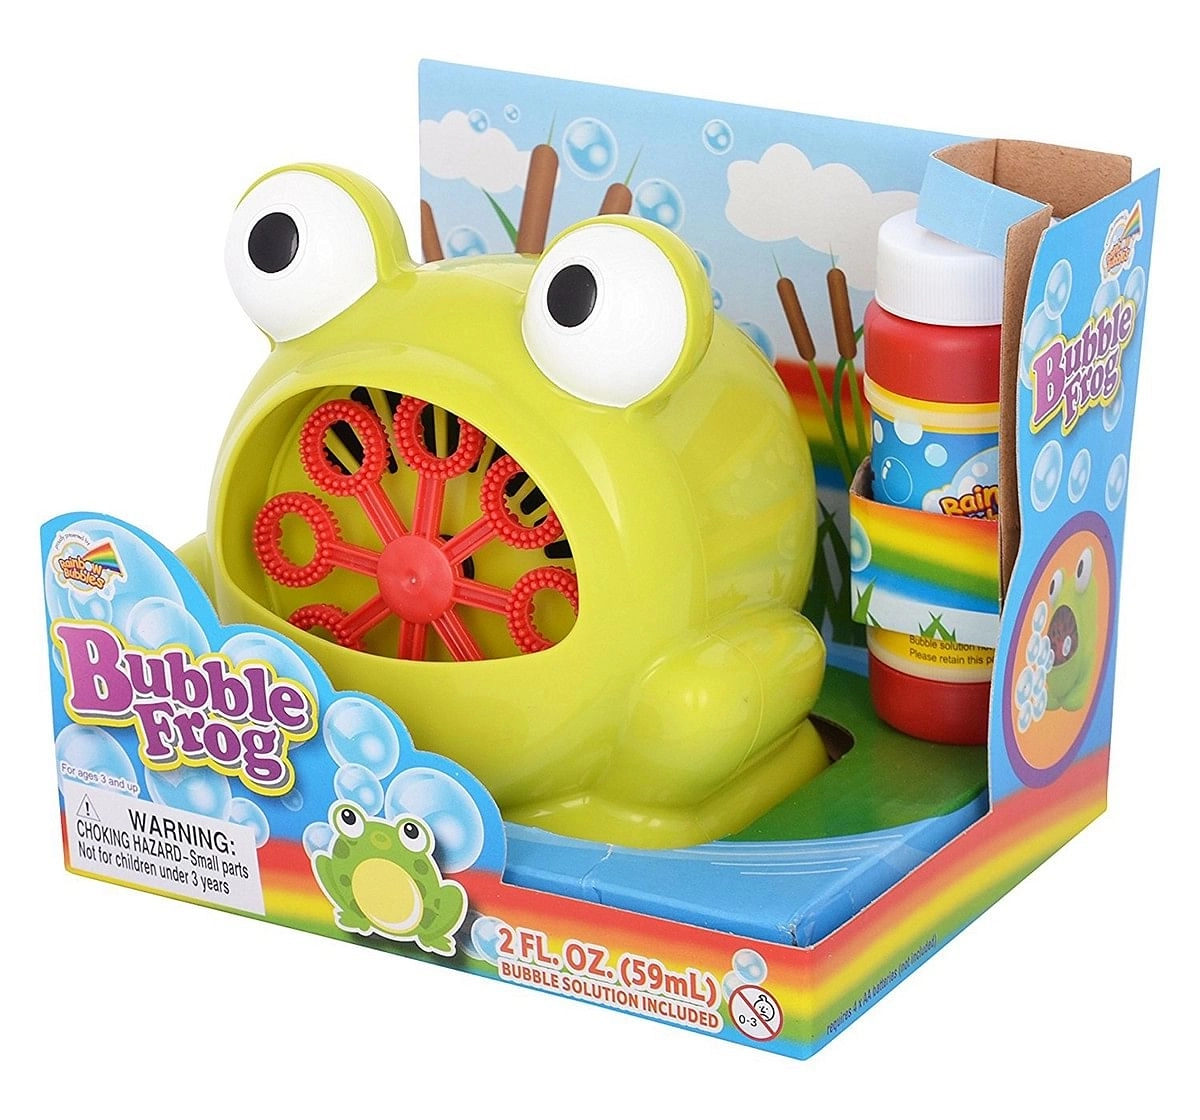  Rainbow Bubbles Frog With Fuel Impulse Toys for Kids age 3Y+ (Green)